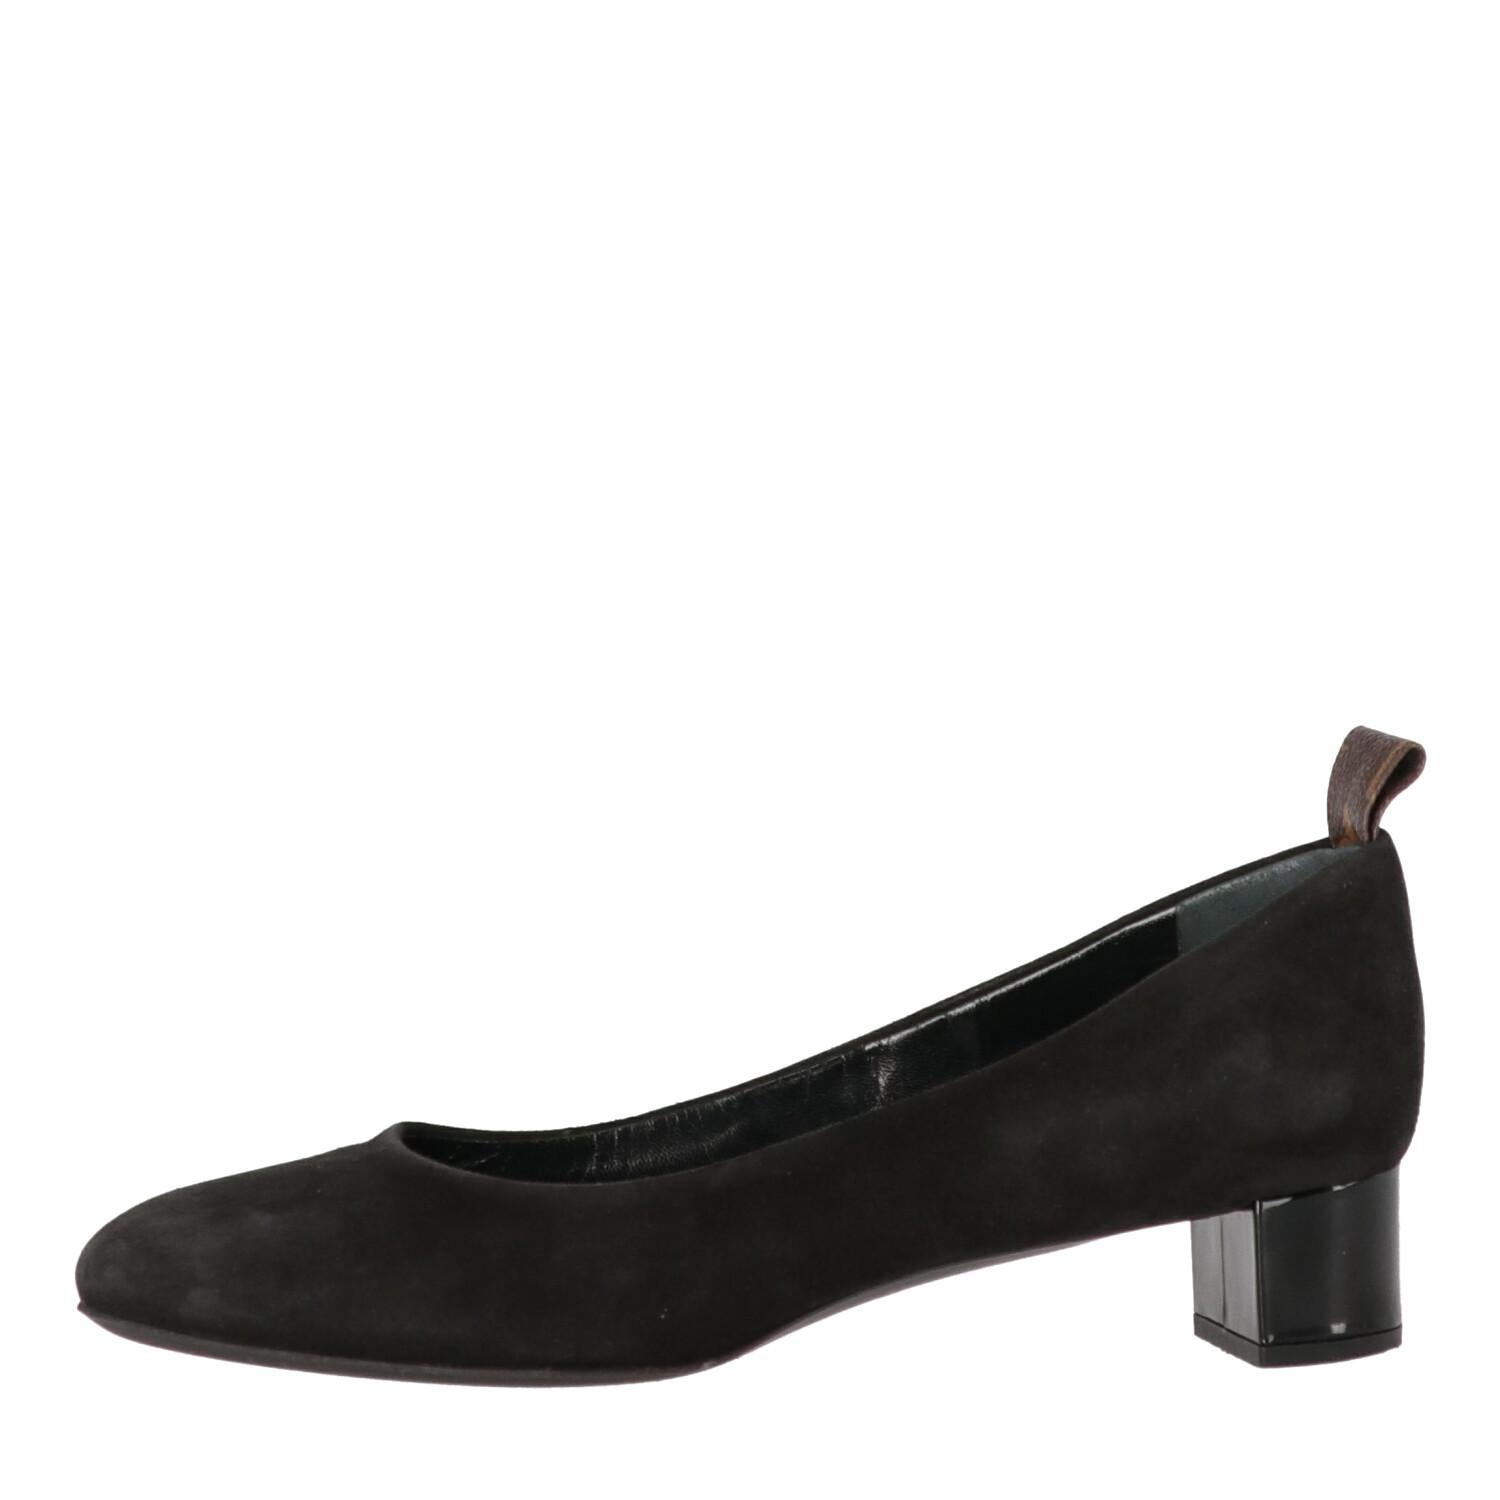 A.N.G.E.L.O. Vintage - ITALY
Louis Vuitton black suede heeled ballet flats with logoed leather back pull and round toe.

The item shows light signs of wear, as shown in the pictures.

Years: 2010s

Made in Italy

Size: 38 EU

Heels: 3.5 cm
Insole: